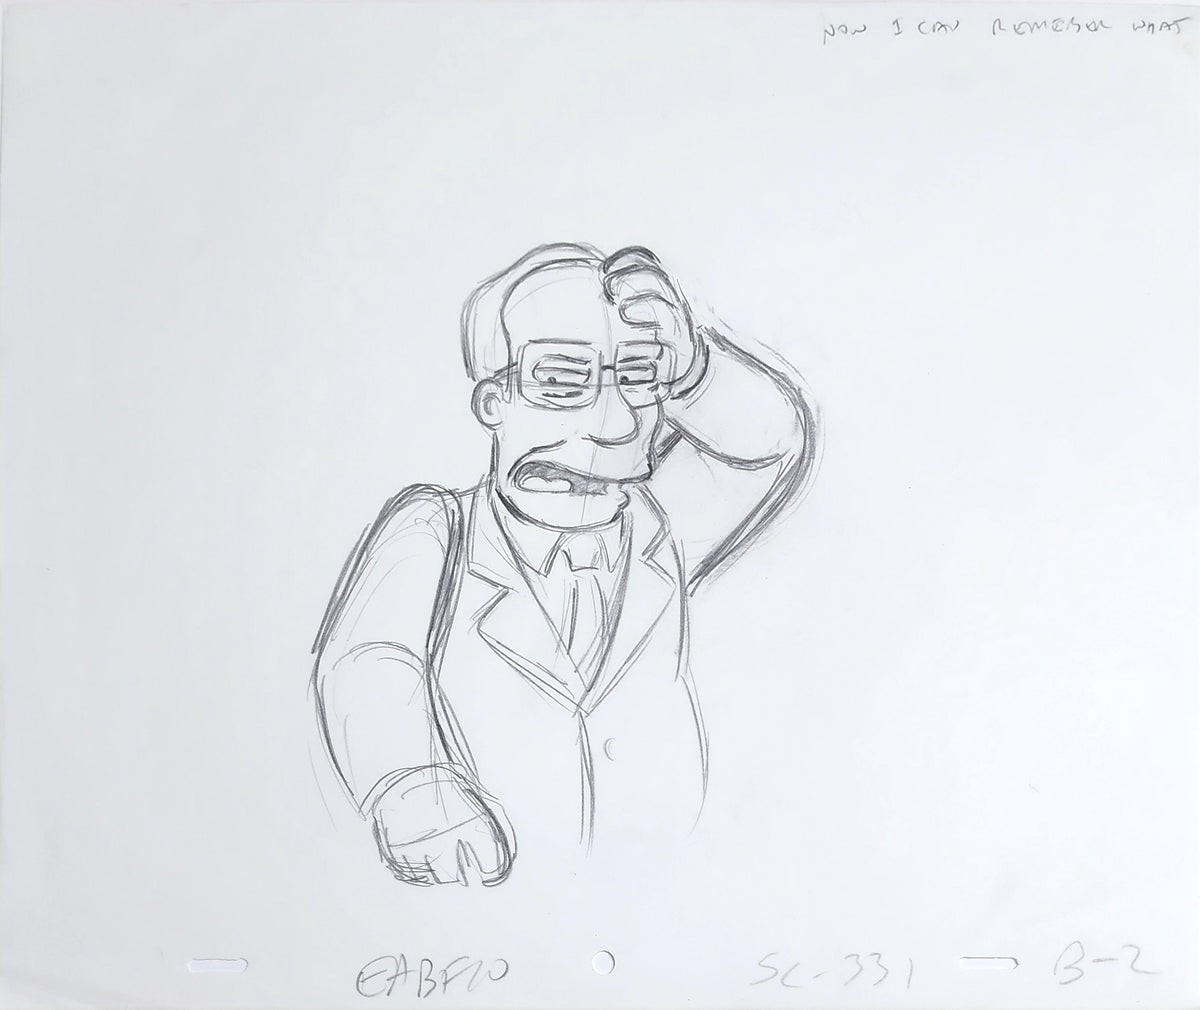 Simpsons Animation Production Cel Drawing - 3817